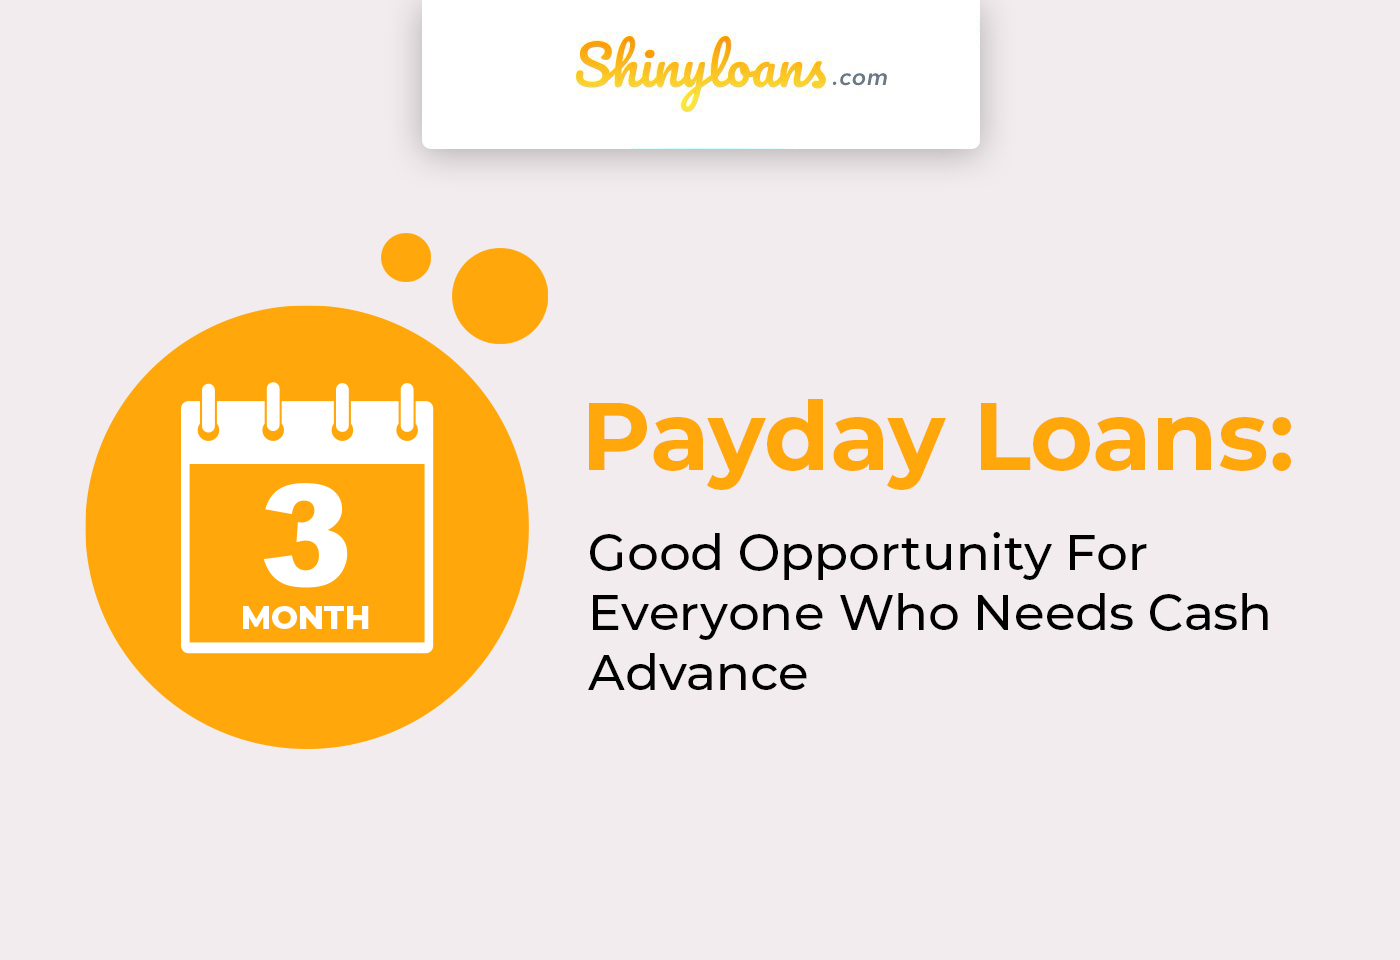 3 Month Payday Loans For Everyone Who Needs Cash Advance